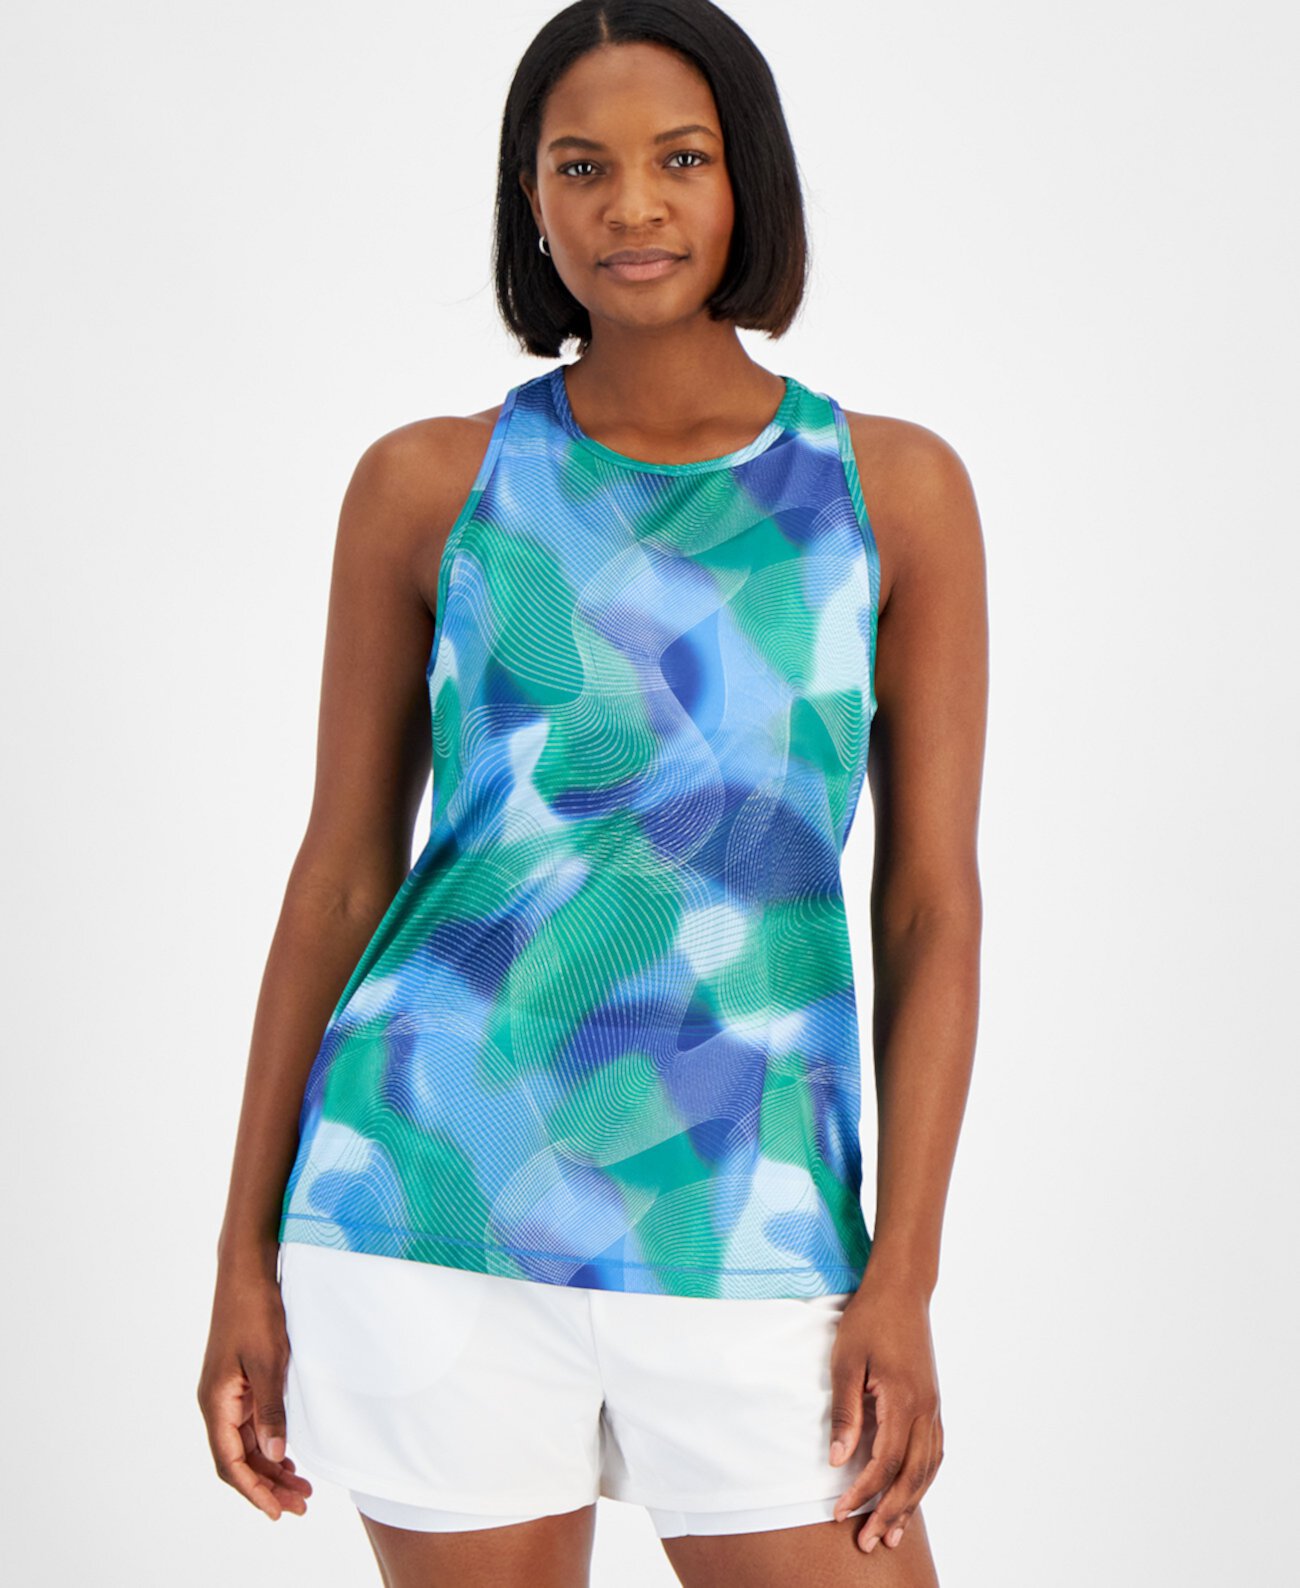 Women's Waves Mesh Racerback Tank Top, Created for Macy's ID Ideology